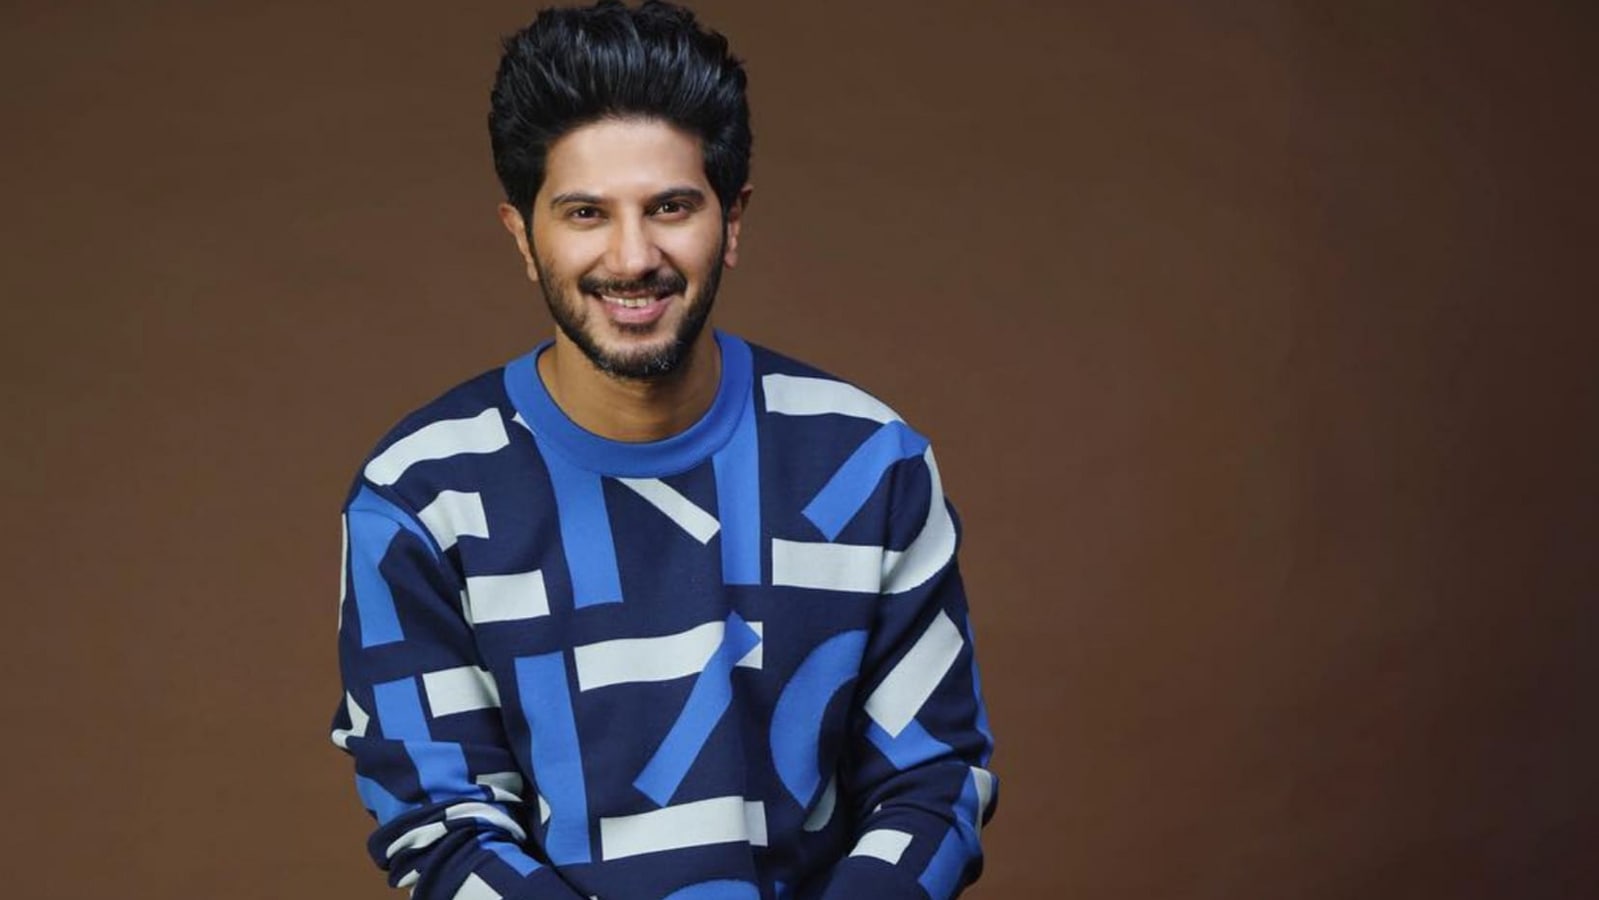 Dulquer Salmaan says he was ‘petrified’ of camera, feared comparisons to father Mammootty